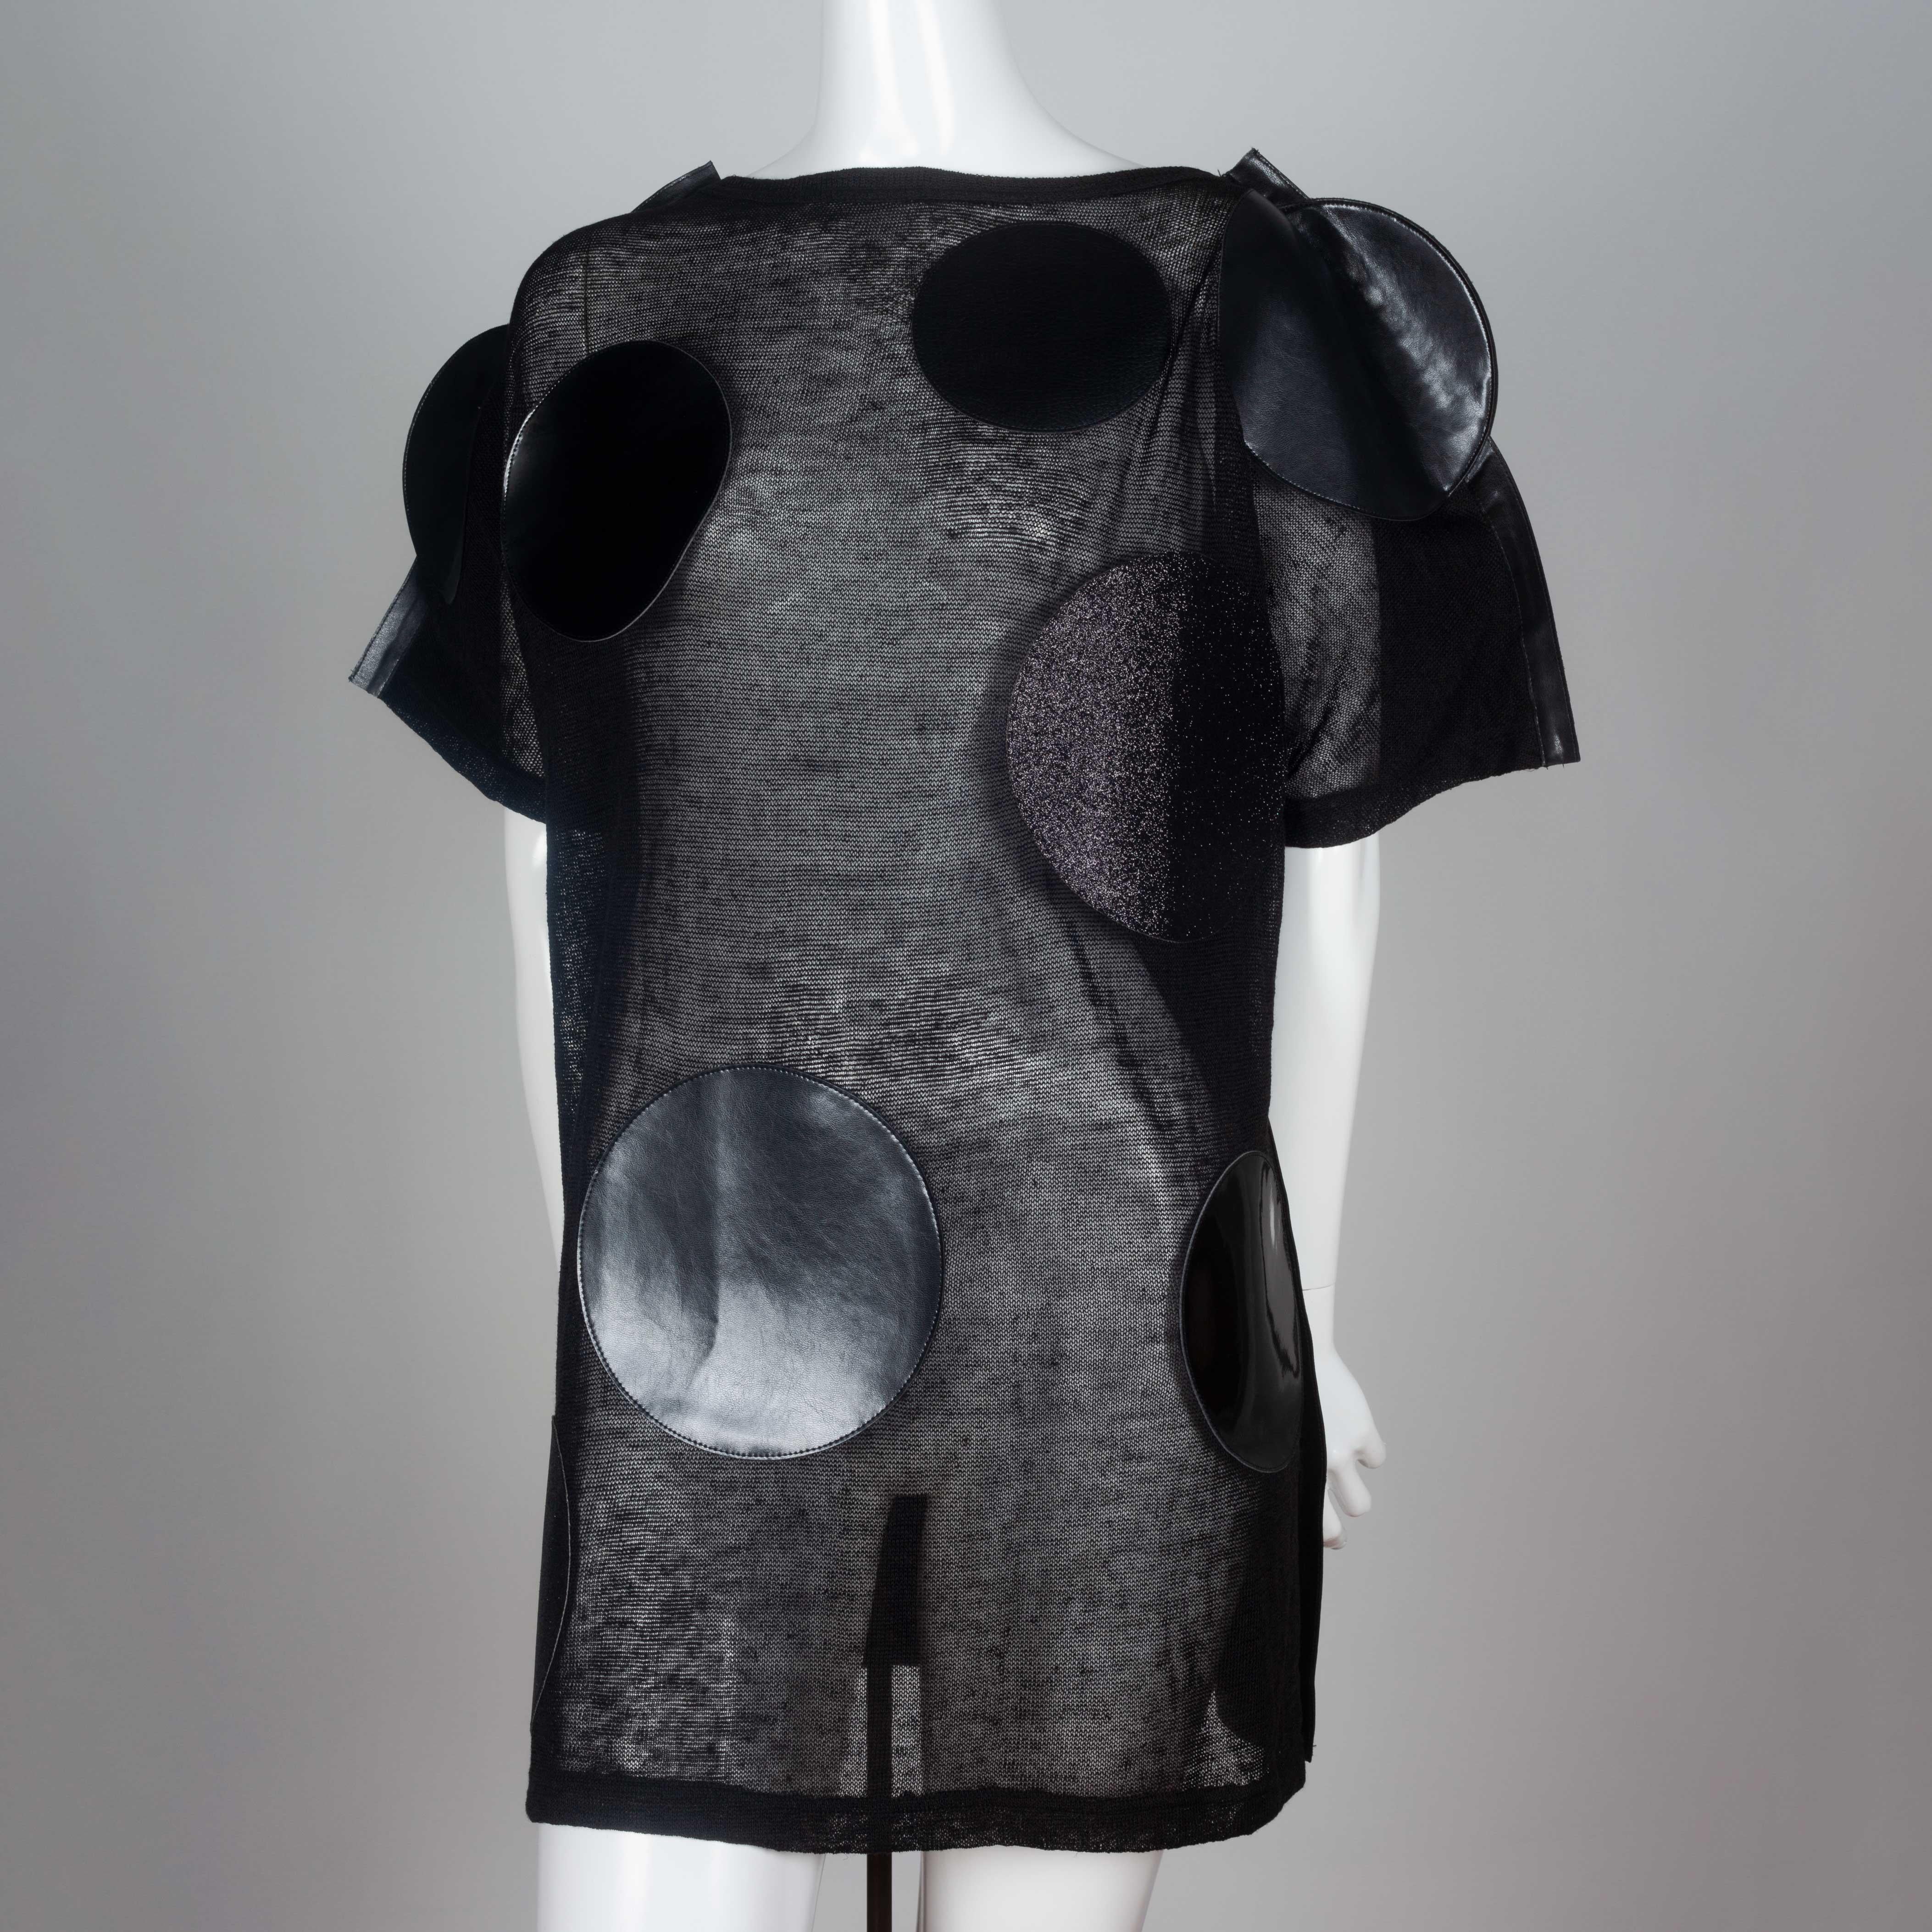 Junya Watanabe Comme des Garçons 2014 oversized sheer linen and synthetic leather dress embellished with faux leather circles. The back in entirely synthetic leather contrasts the front circle design.
 
YEAR: 2014
MARKED SIZE: S
US WOMEN'S: S
US